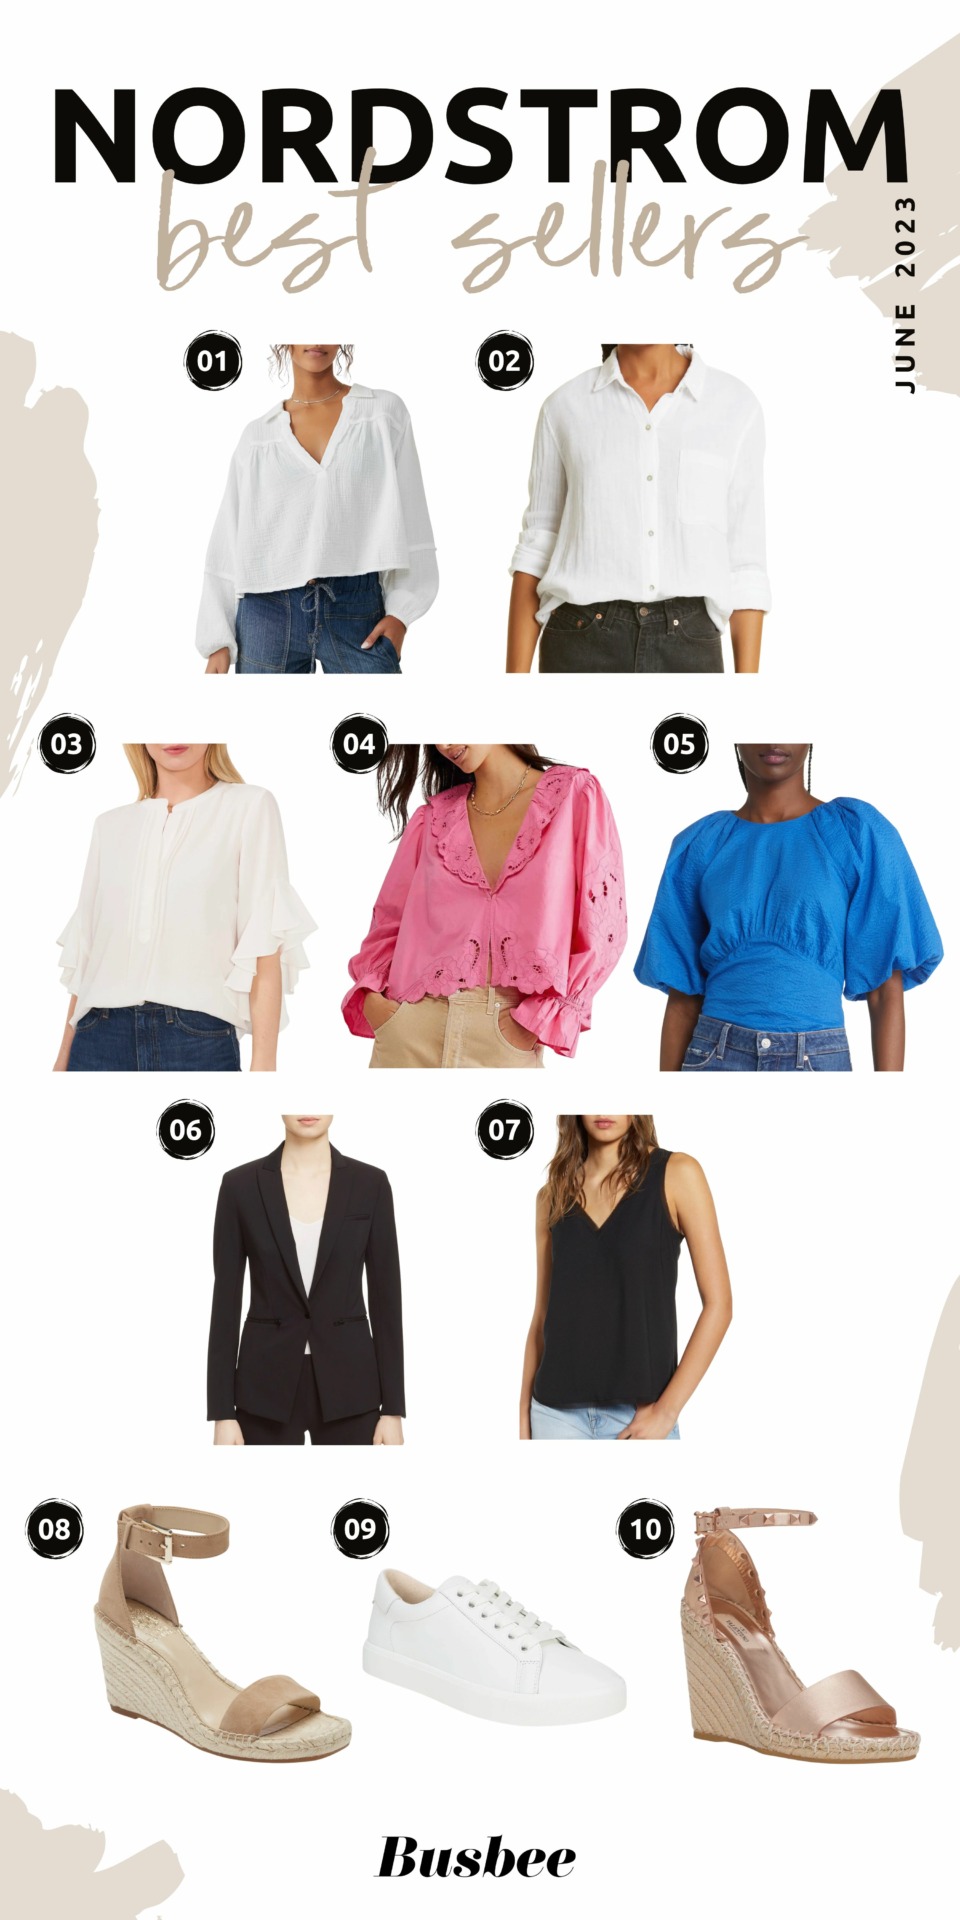 nordstrom best sellers, nordstrom top sellers, what to buy at nordstrom, nordstrom shopping cart, what to buy from nordstrom, best blazers at nordstrom, best sandals at nordstrom, best tops at nordstrom, nordstrom anniversary sale, nordstrom anniversary sale 2023